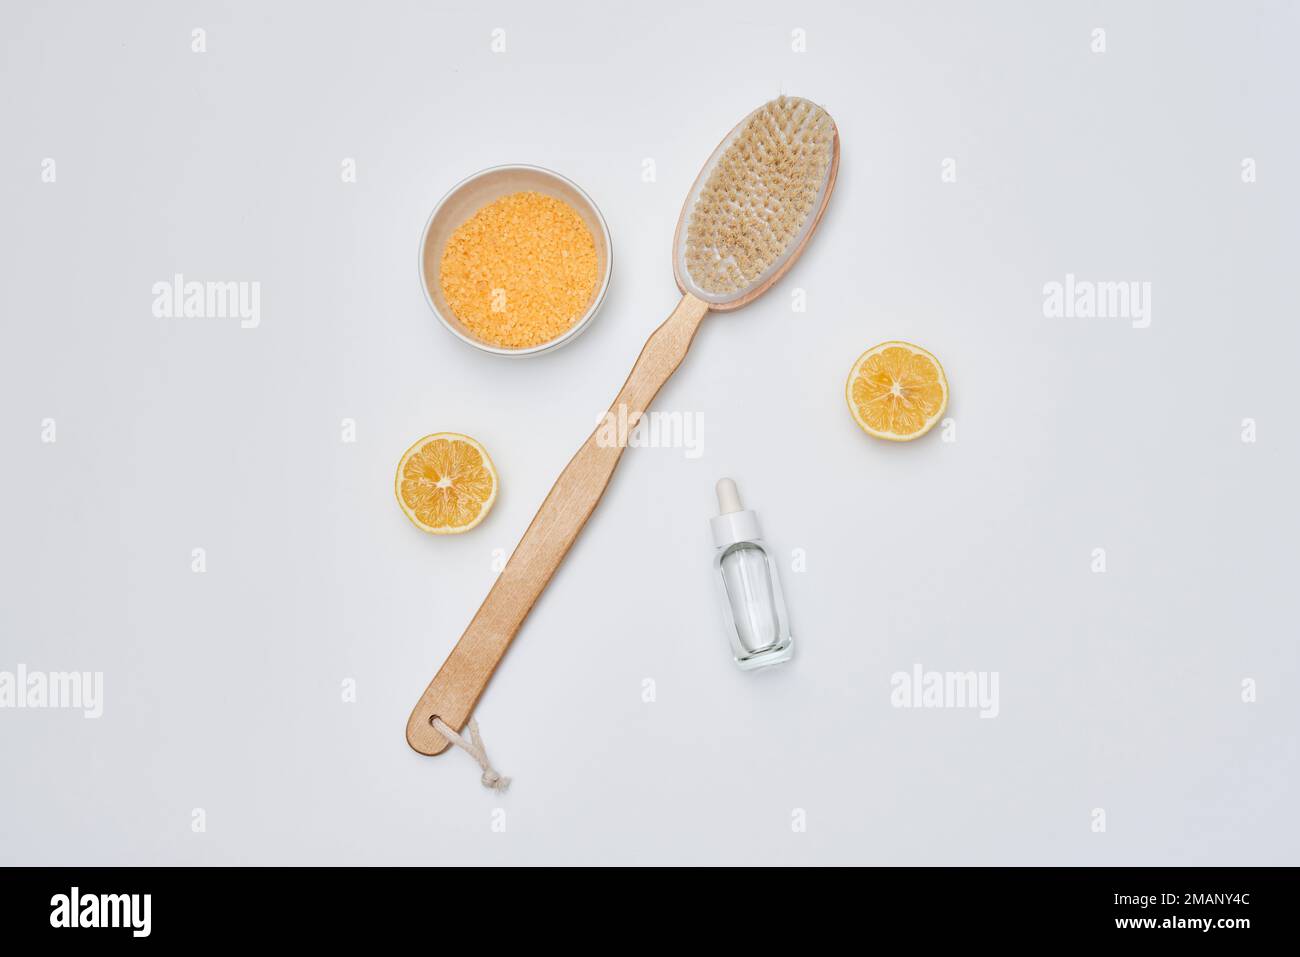 some lemons and a toothbrush on a white background with space to the right for your text or image Stock Photo